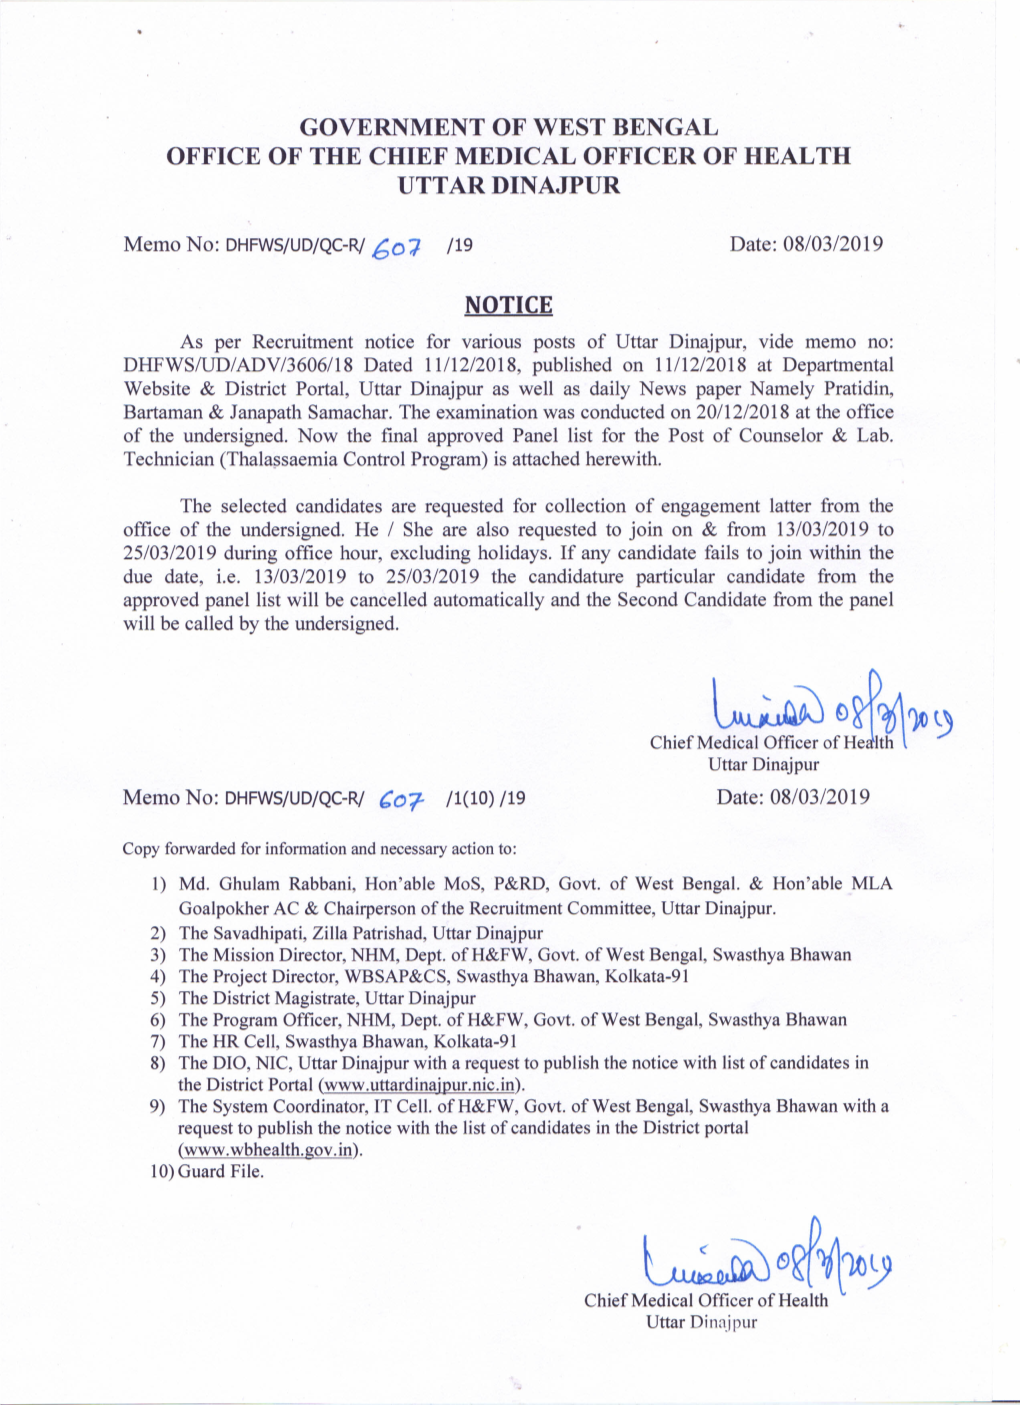 Ernment of West Bengal Office of the Chief Medical Officer of Health Uttar Dinajpur